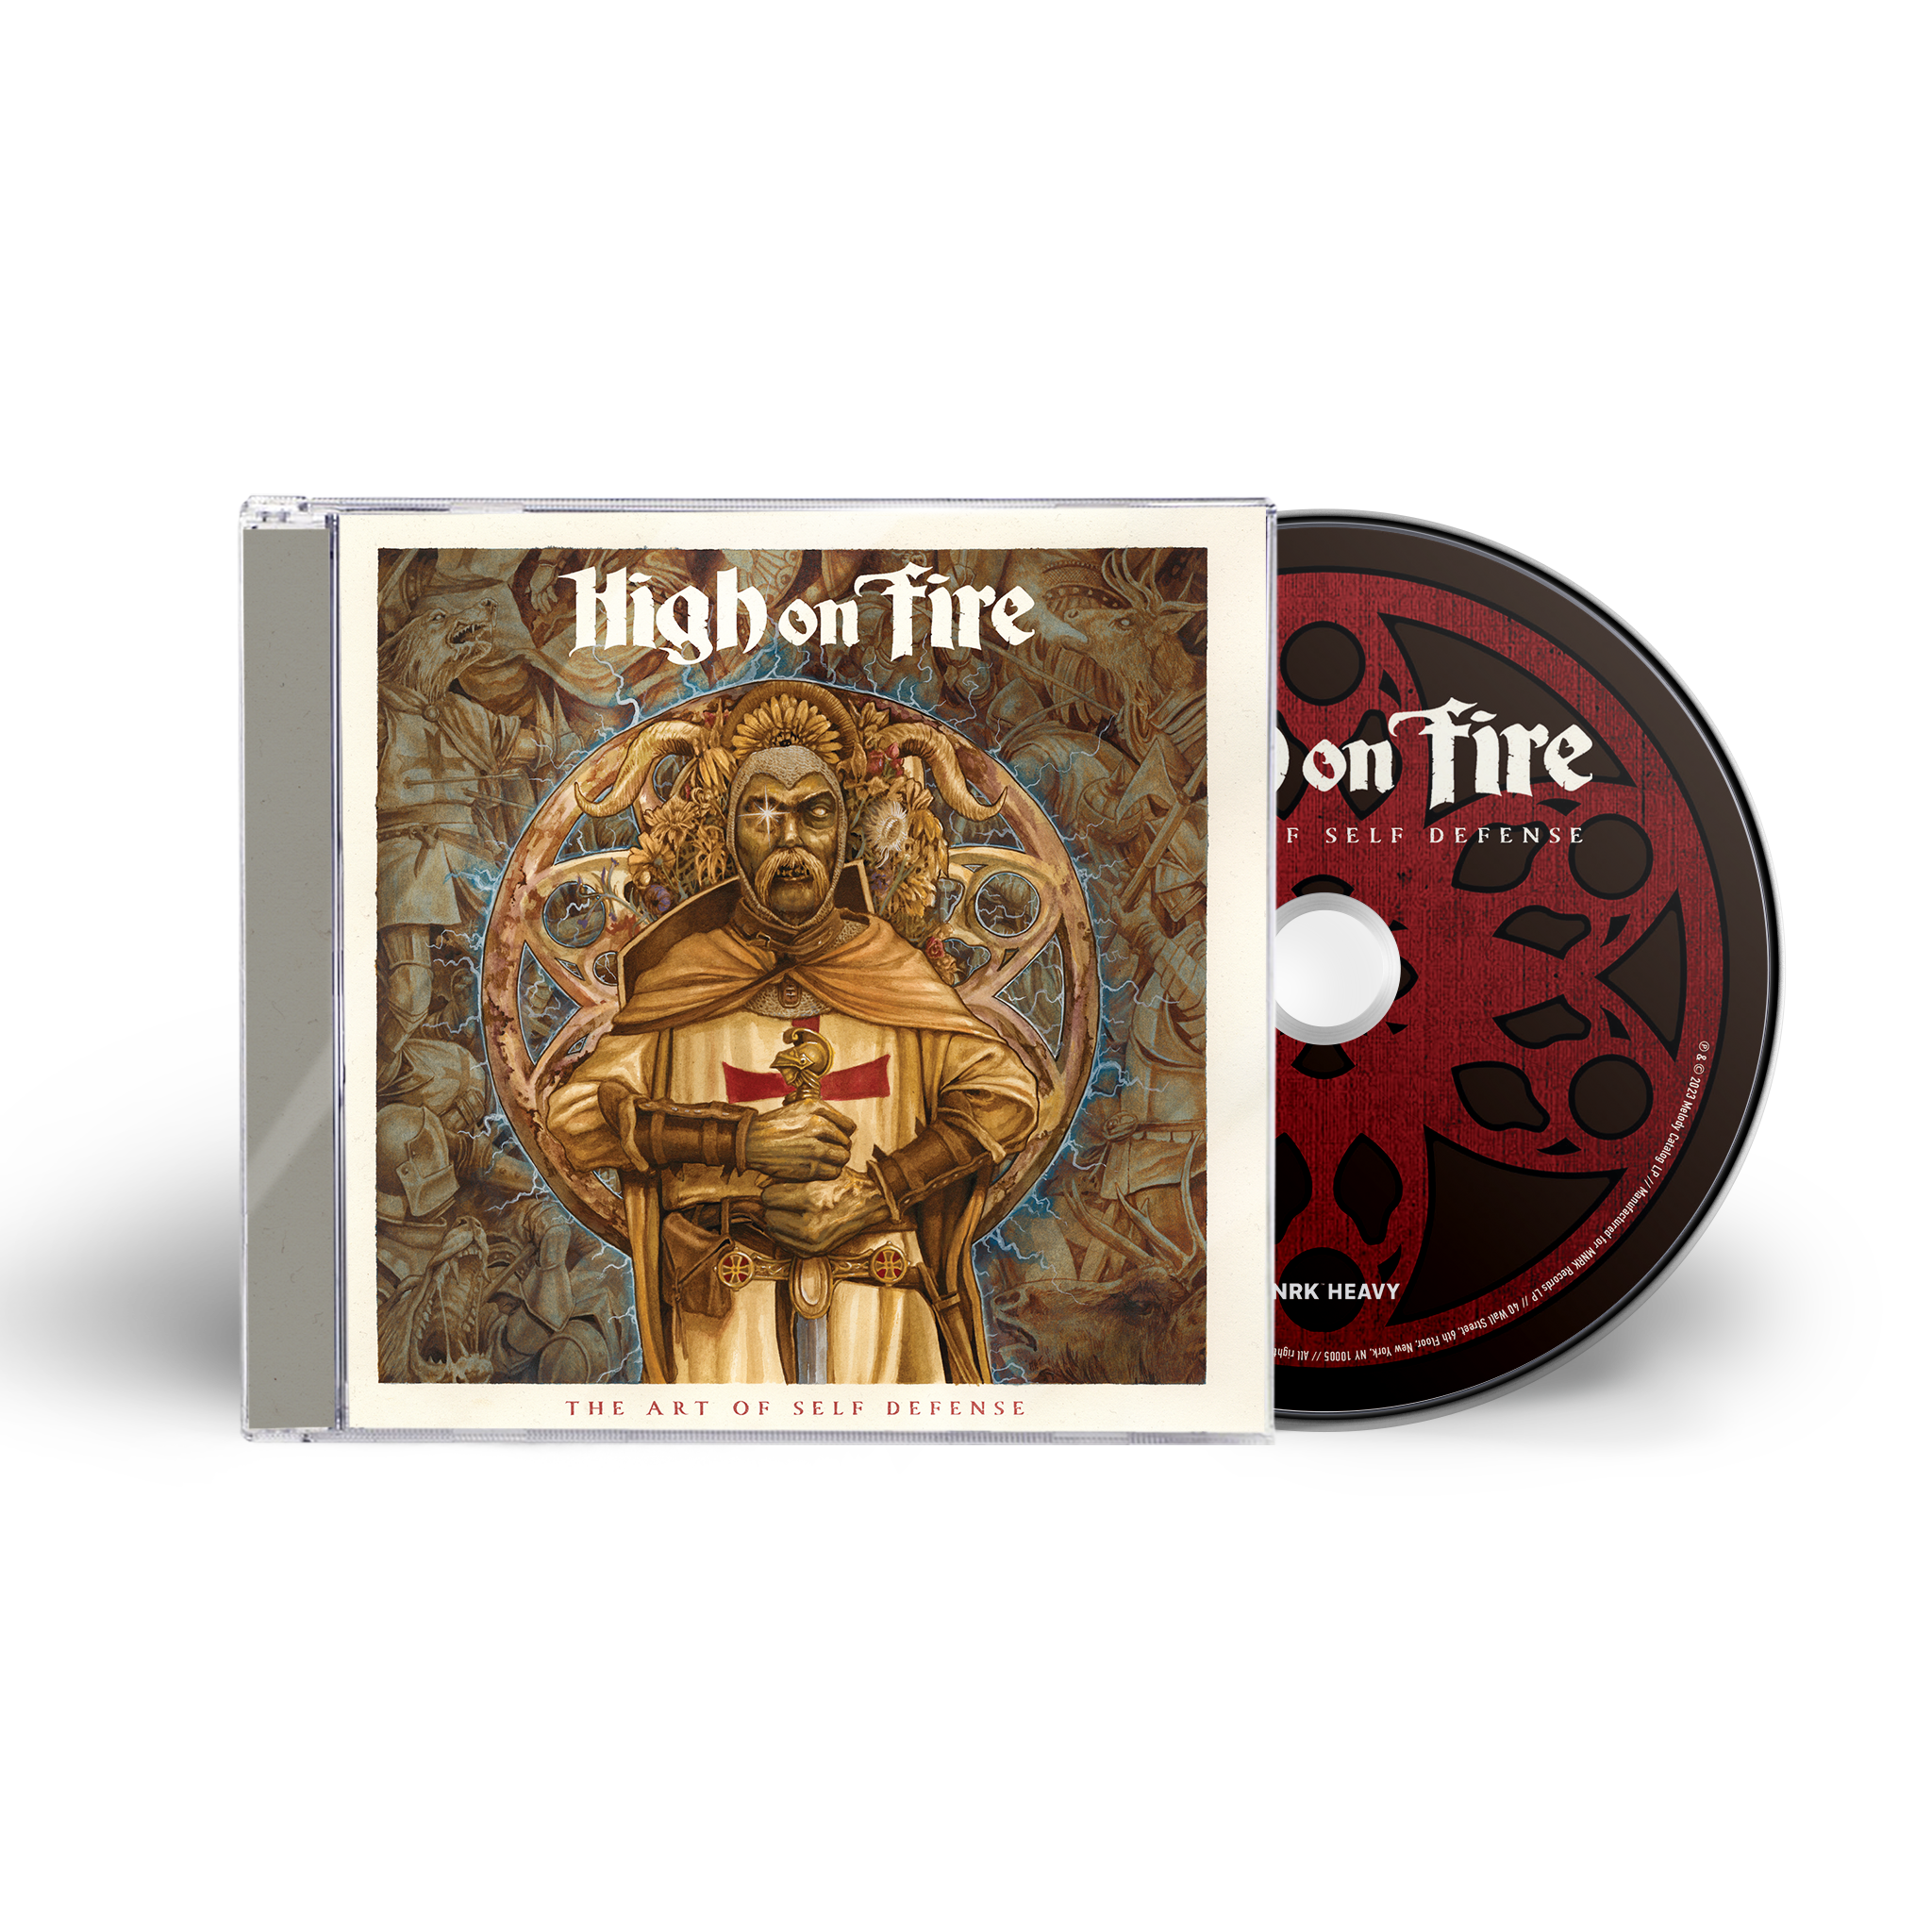 High On Fire "The Art of Self Defense" - CD